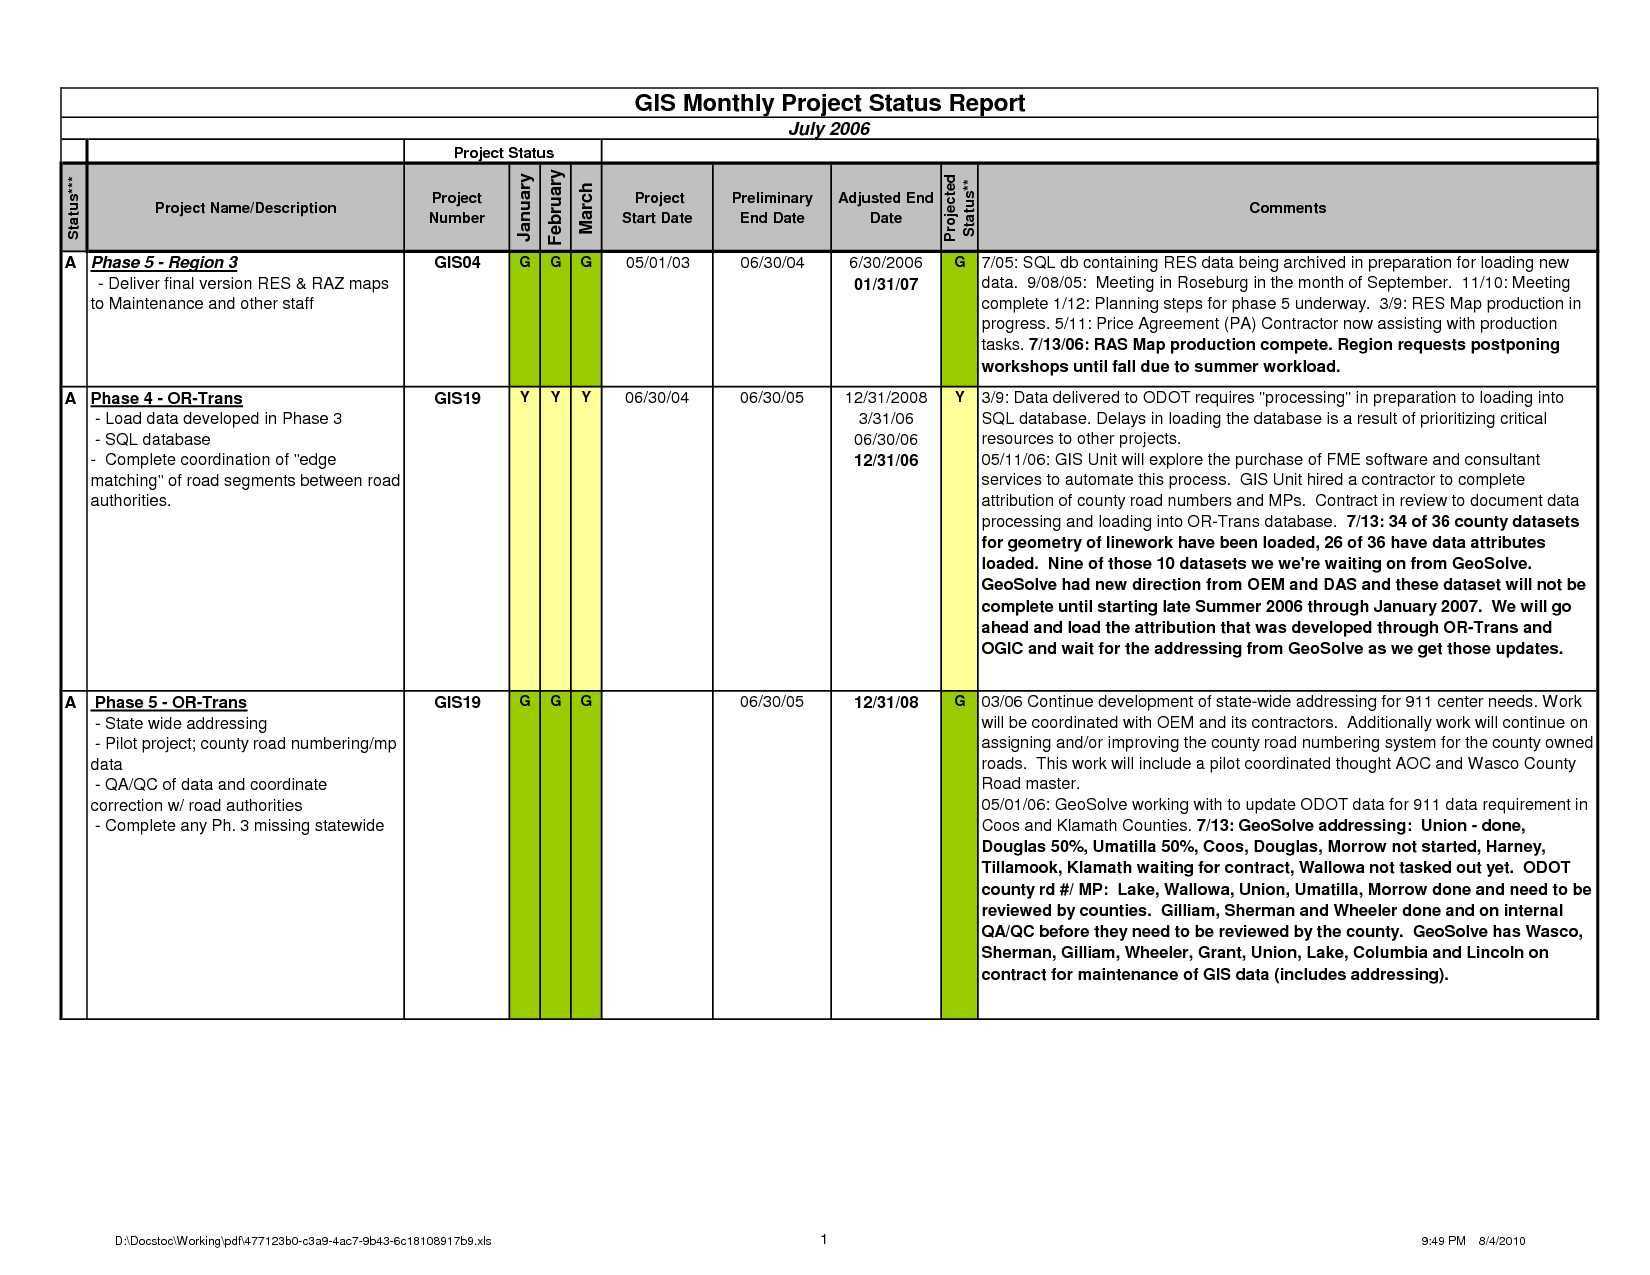 001 Status Report Template Excel Frightening Ideas Work Regarding Daily Project Status Report Template